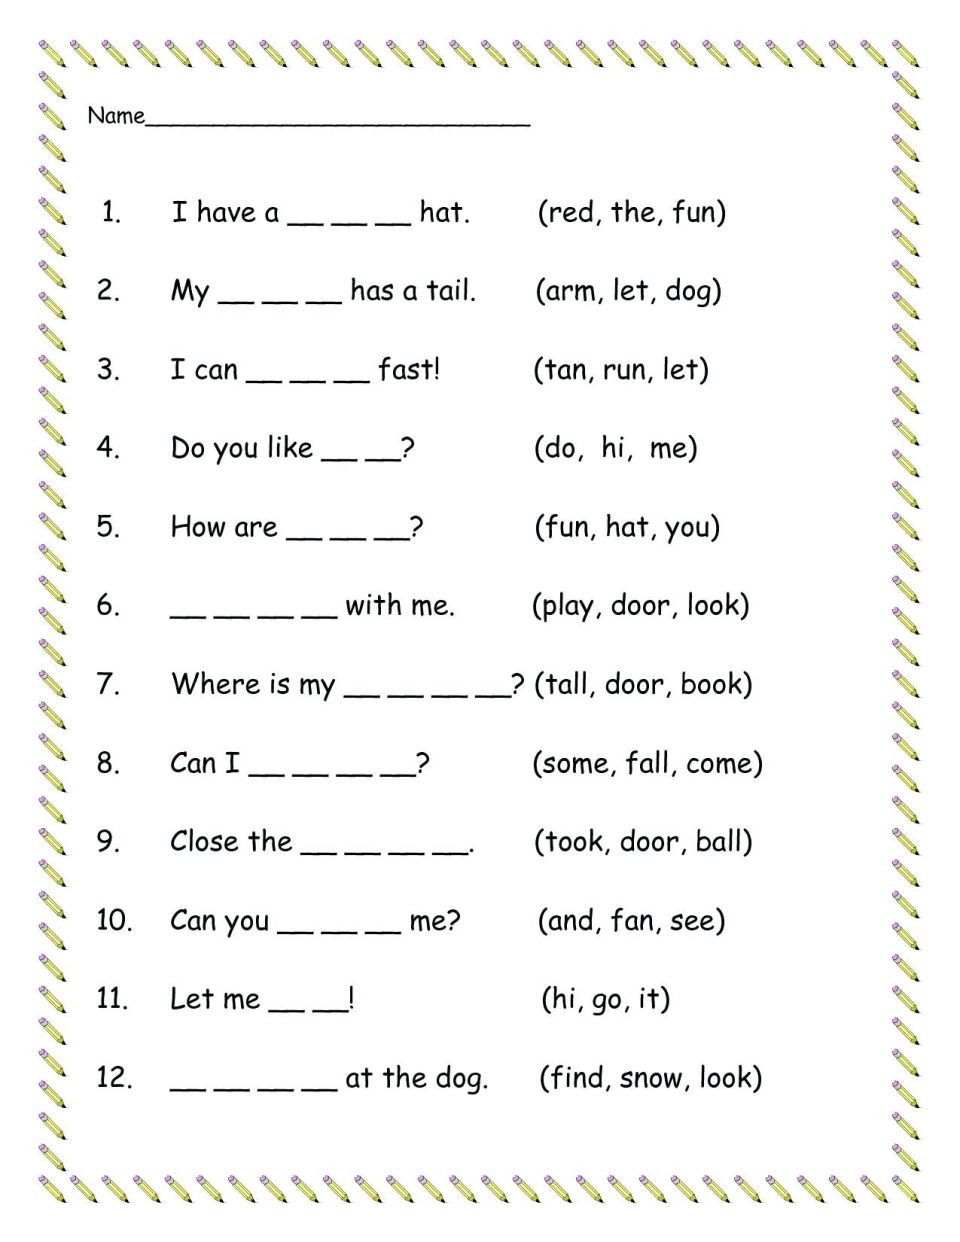 1st and 2nd grade sight words